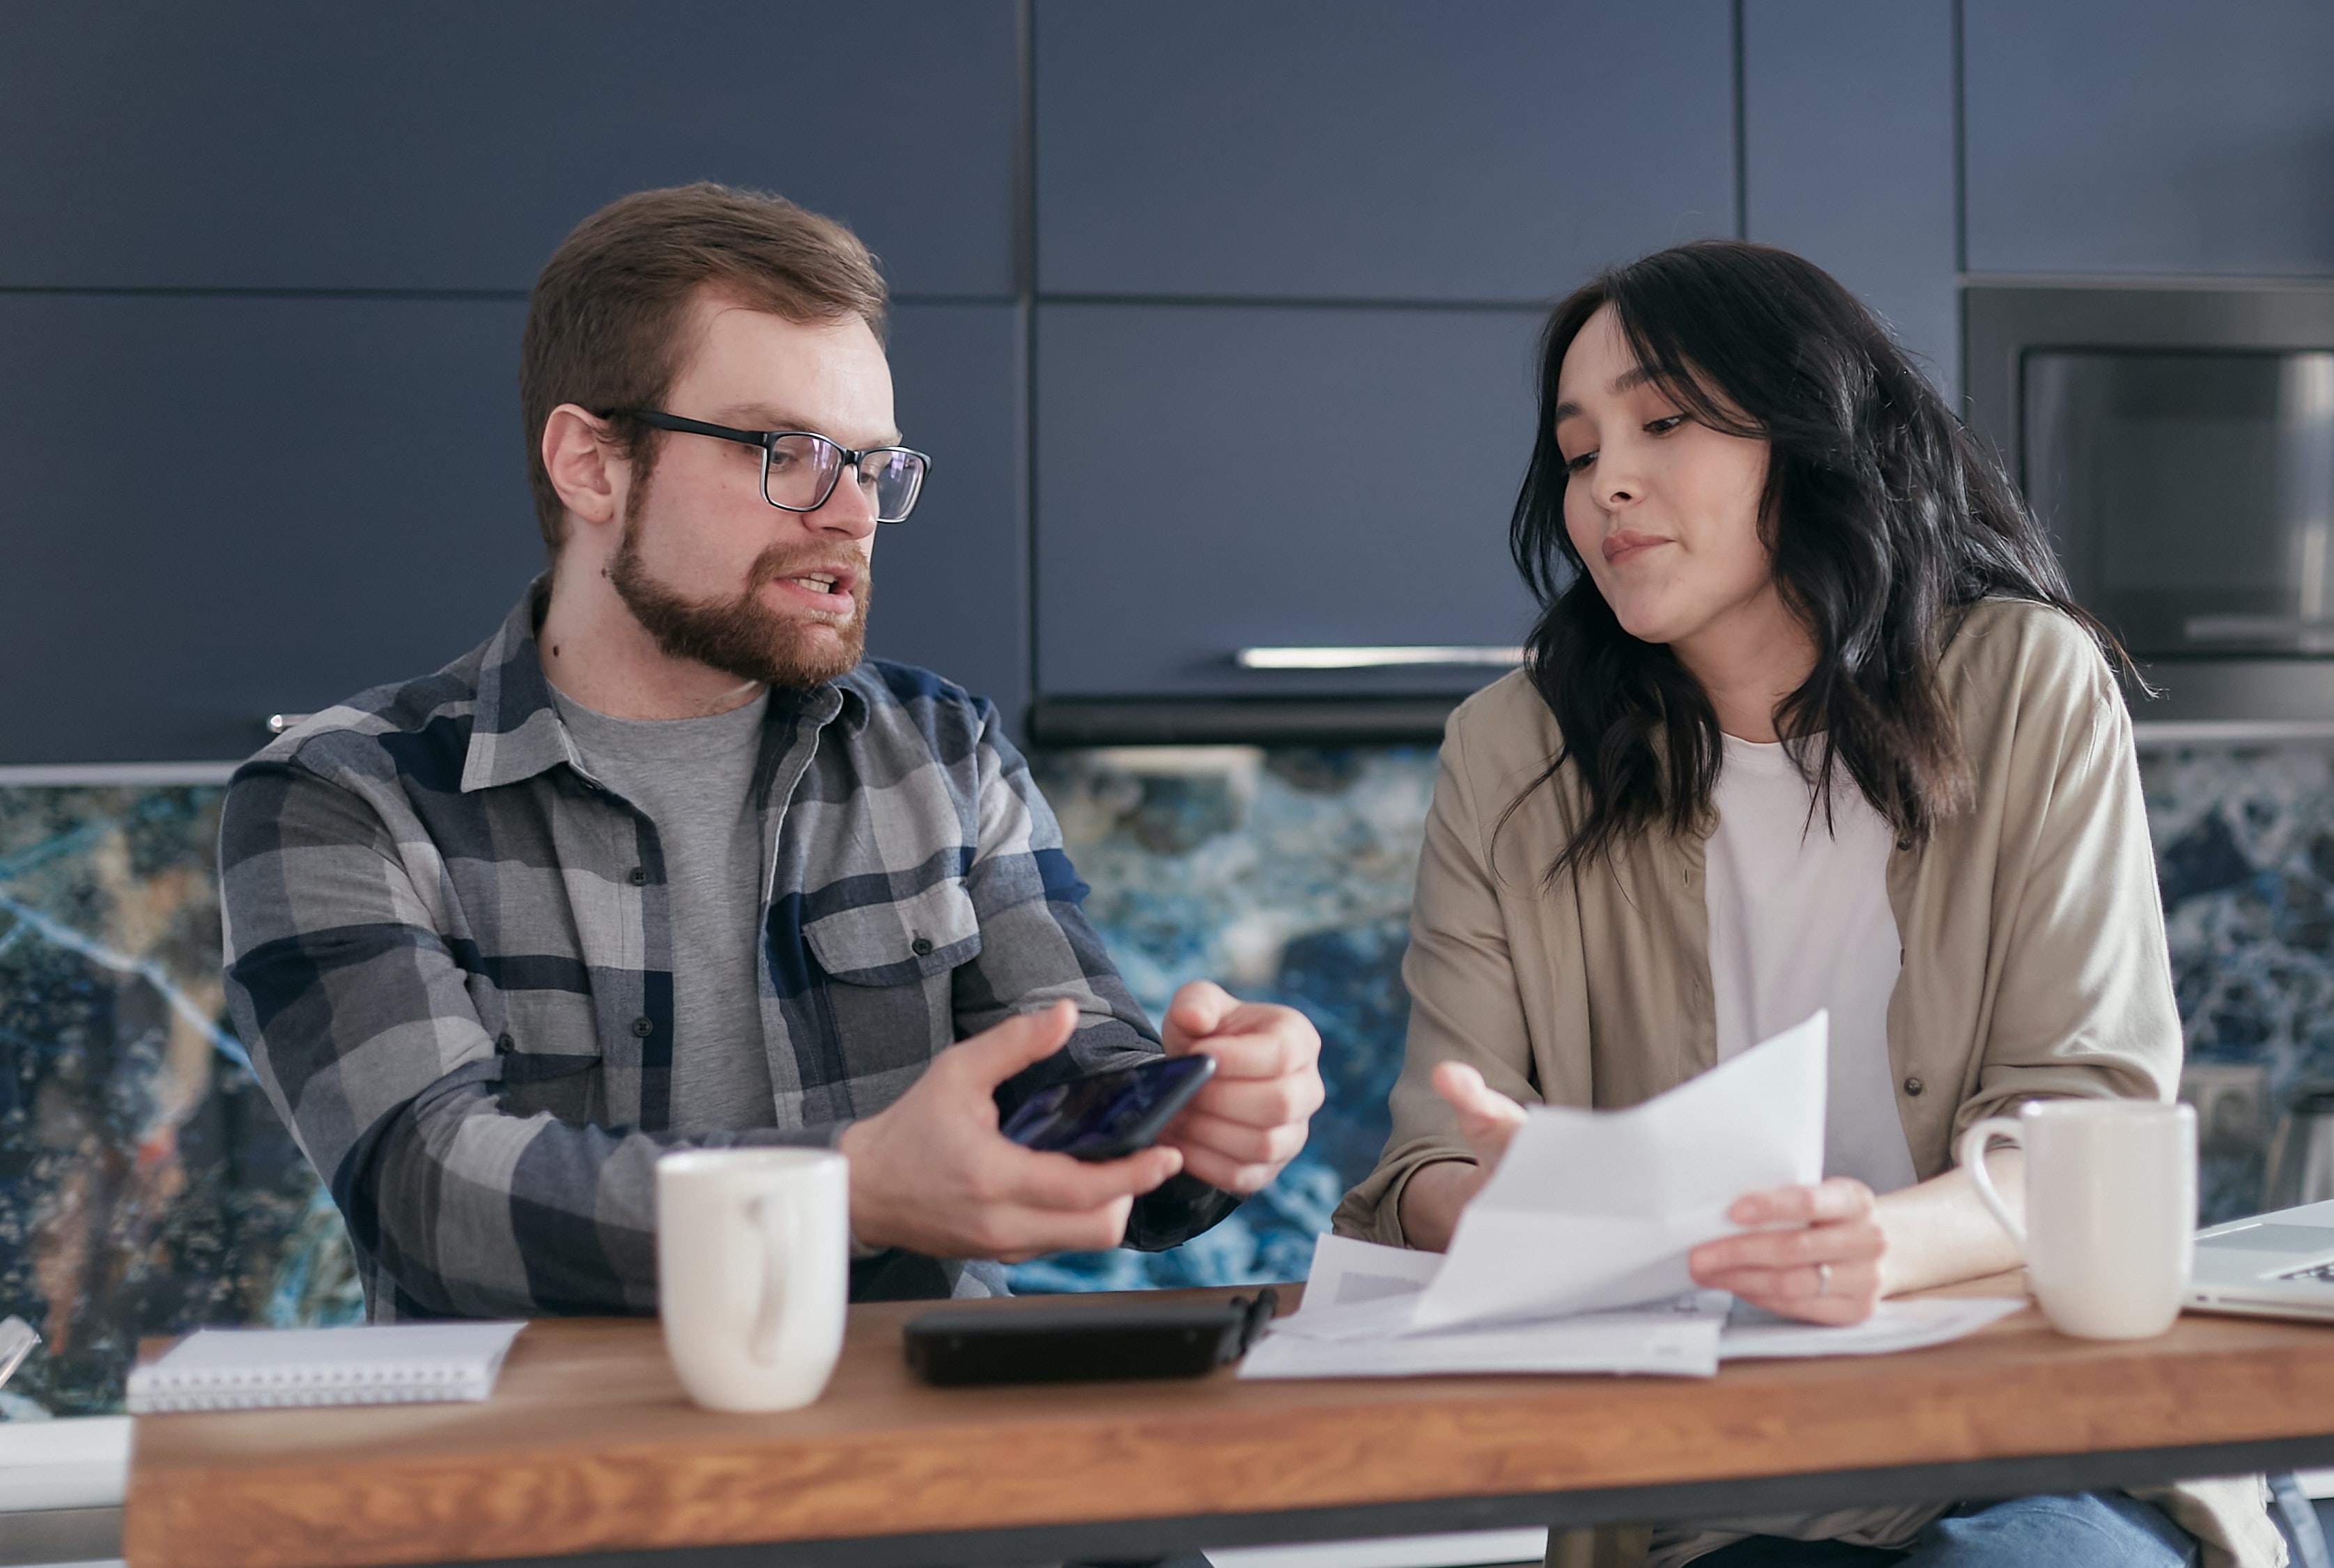 A man and woman discussing their financial situation over some paperwork, a phone, and coffee